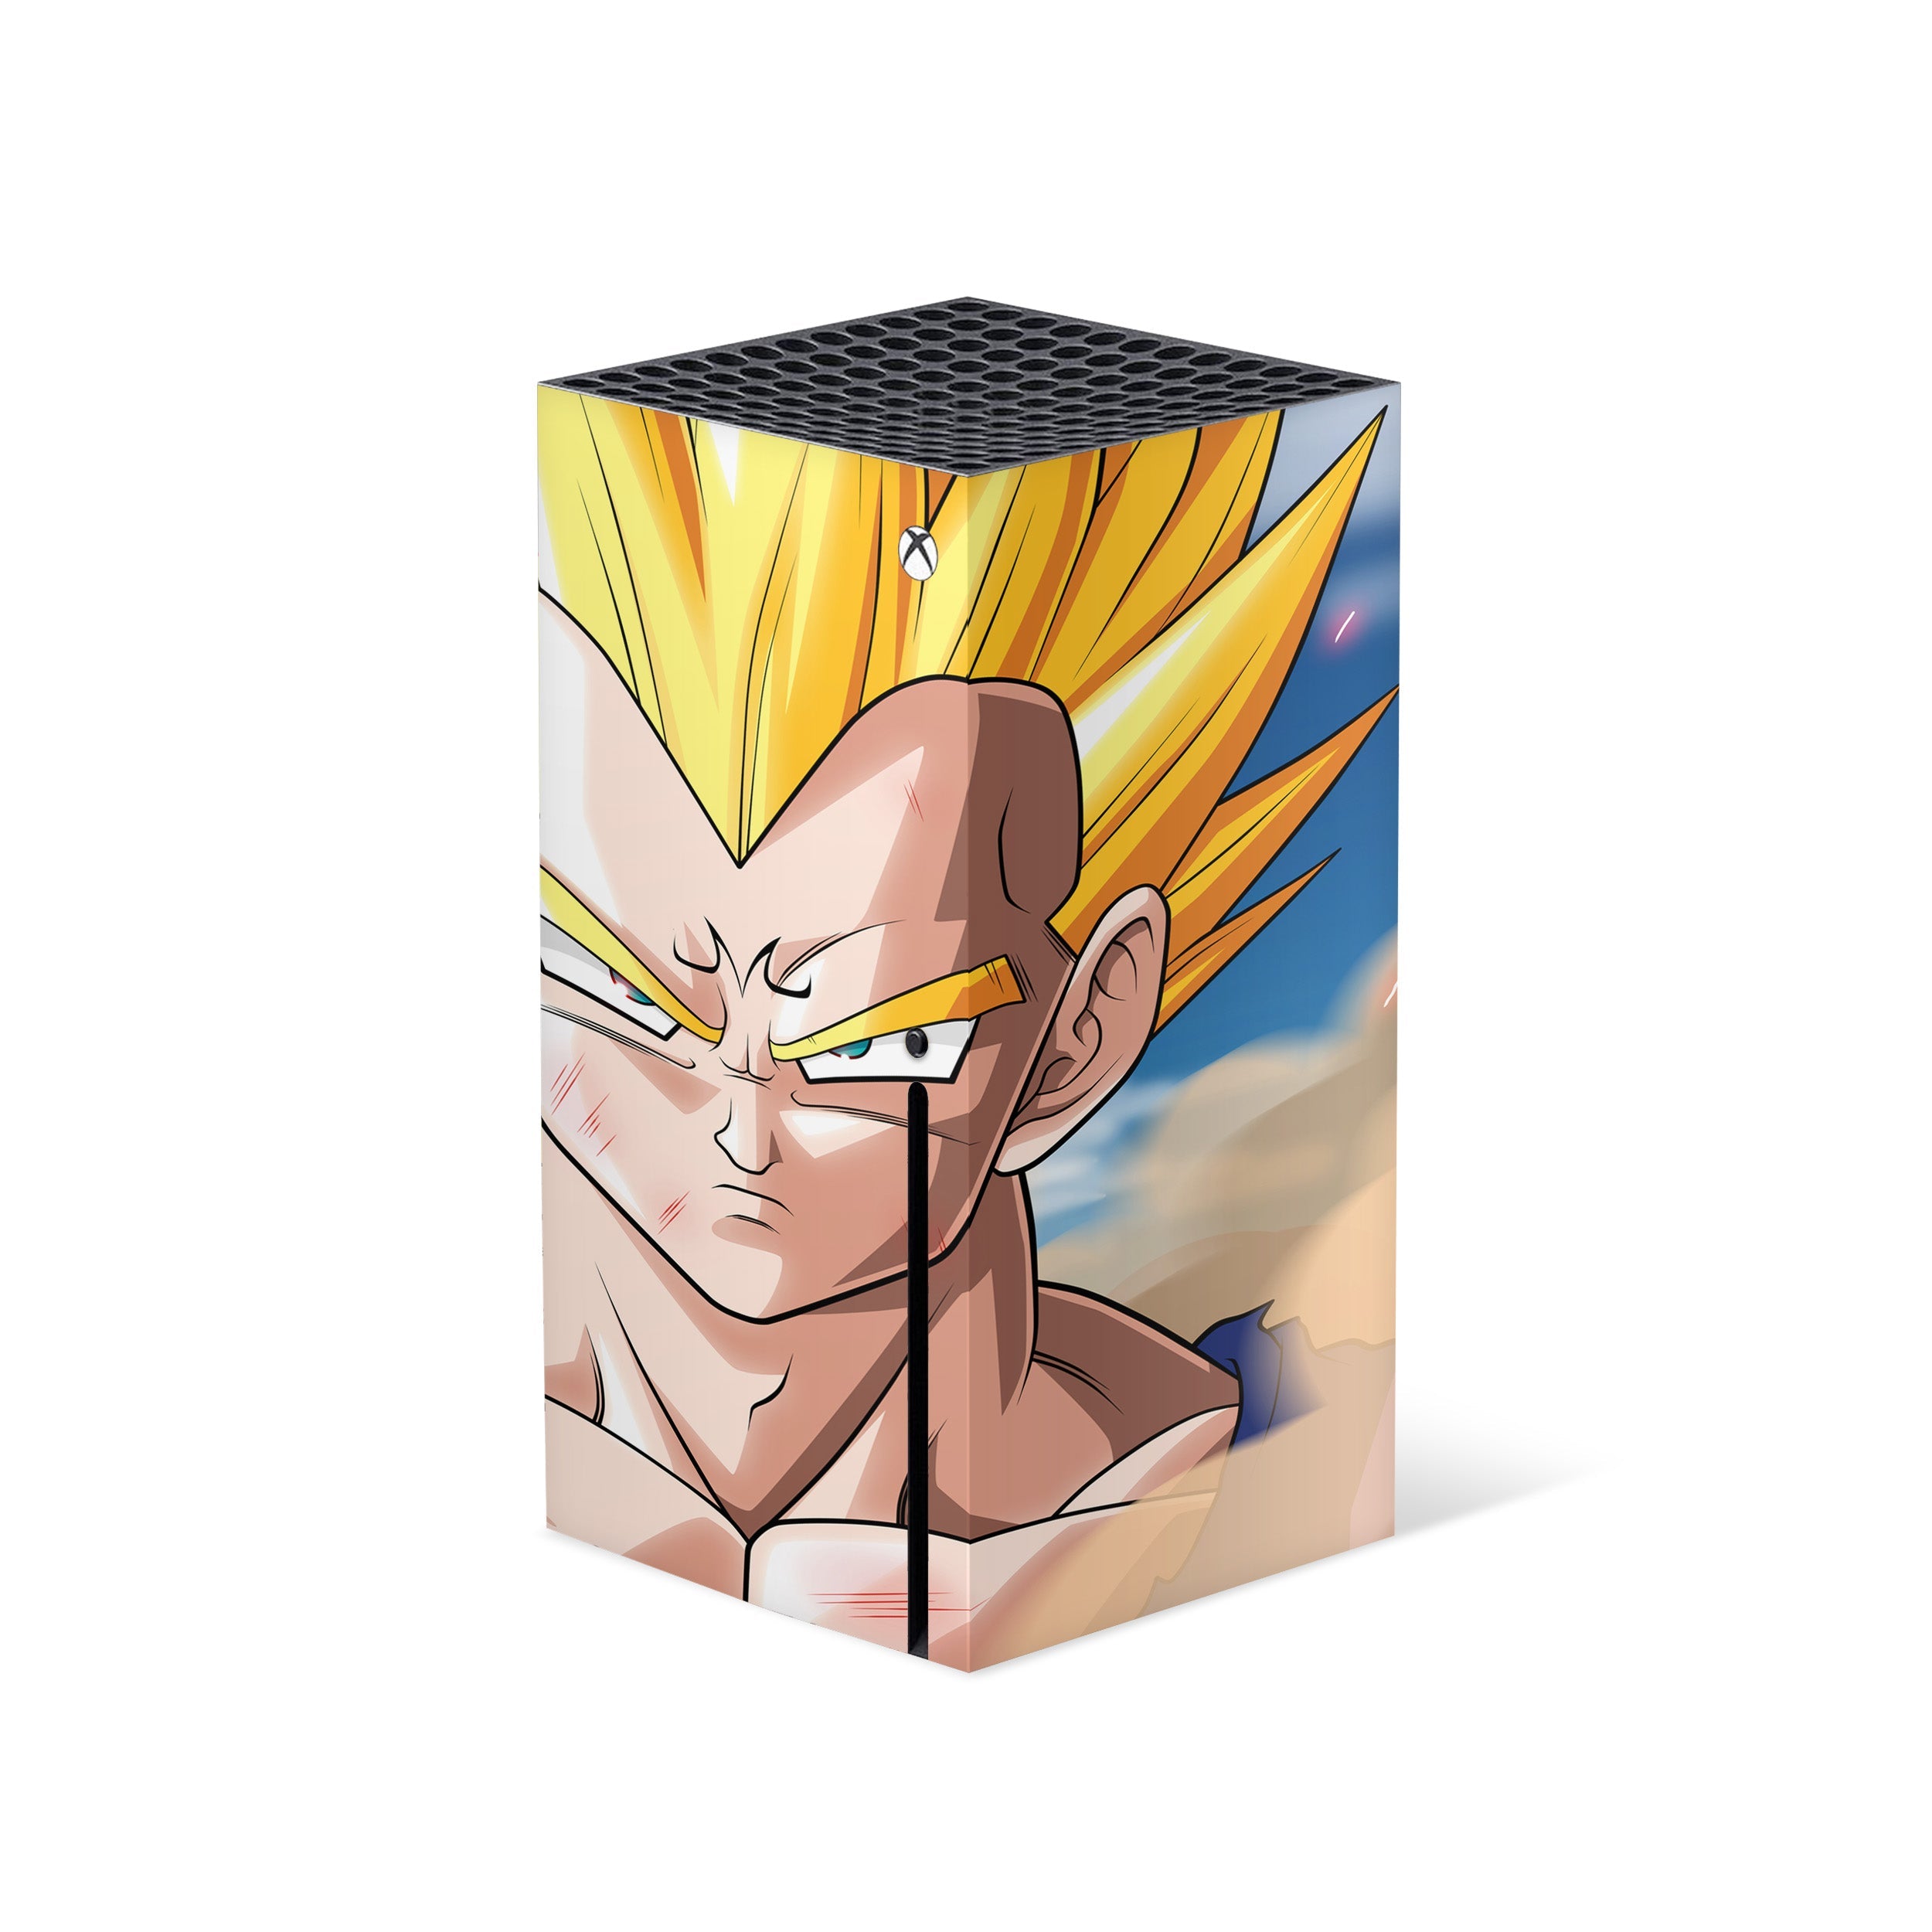 A video game skin featuring a Dragon Ball Z Vegeta design for the Xbox Series X.